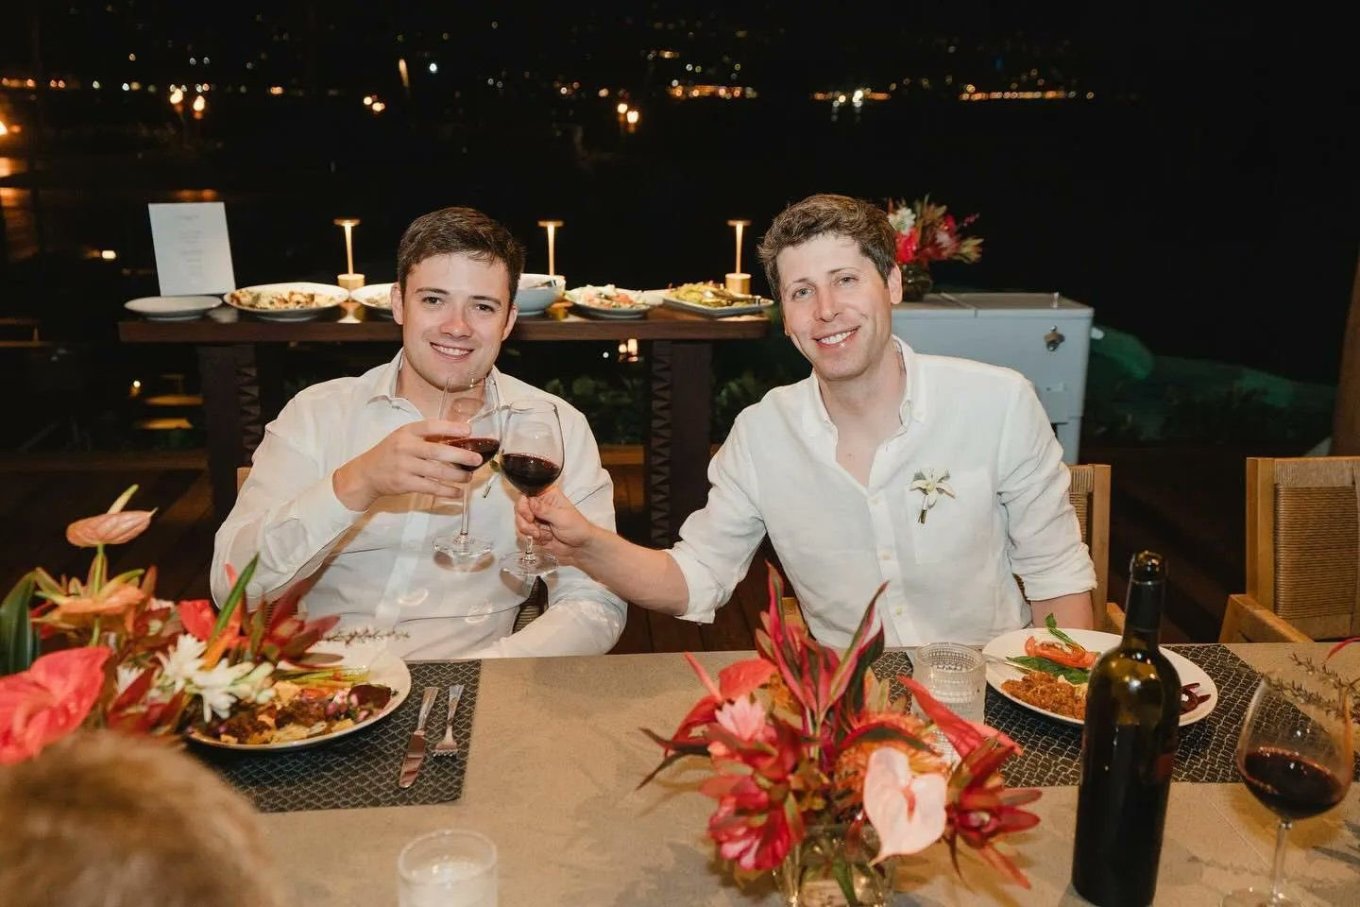 CEO of OpenAI, Sam Altman, Ties the Knot with Partner Oliver Mulherin